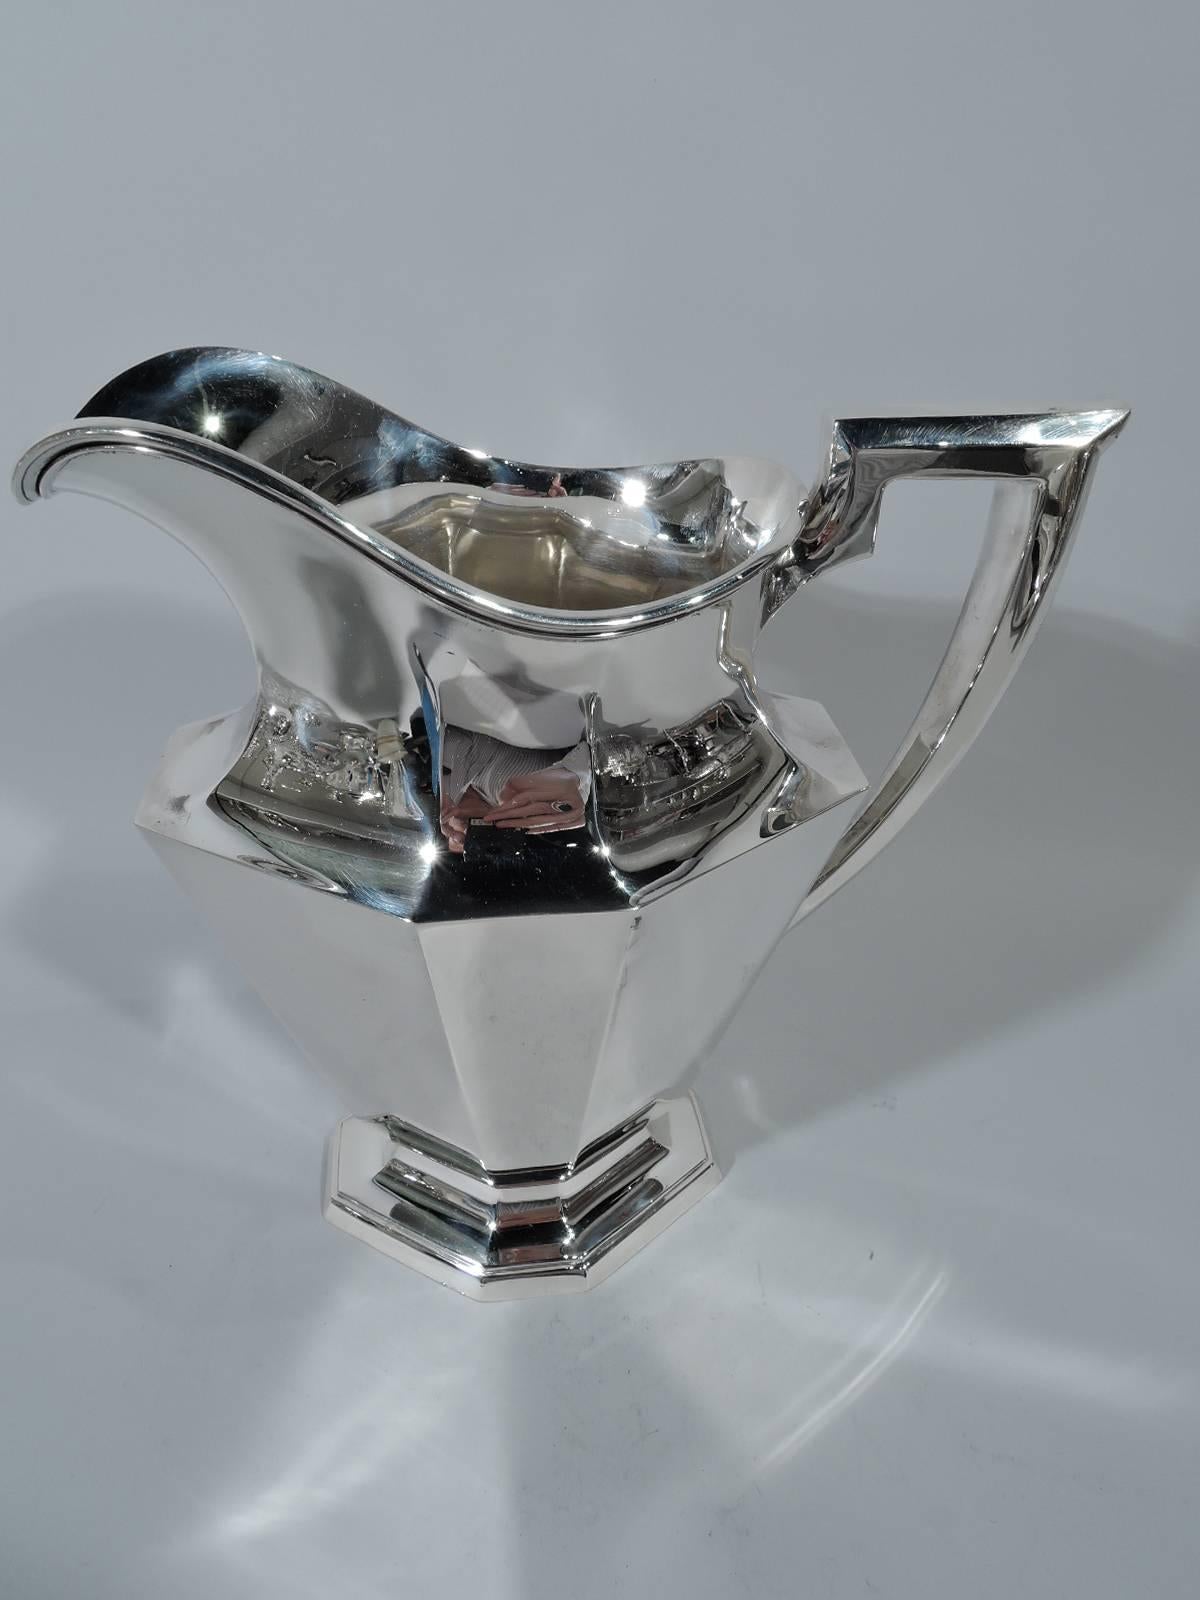 Art Deco sterling silver water pitcher. Made by Gorham in Providence in 1920. Tapering sides with alternating wide and narrow facets, foot same, scrolled bracket handle, and helmet mouth. Hallmark includes date symbol, no. A9716, and volume (3